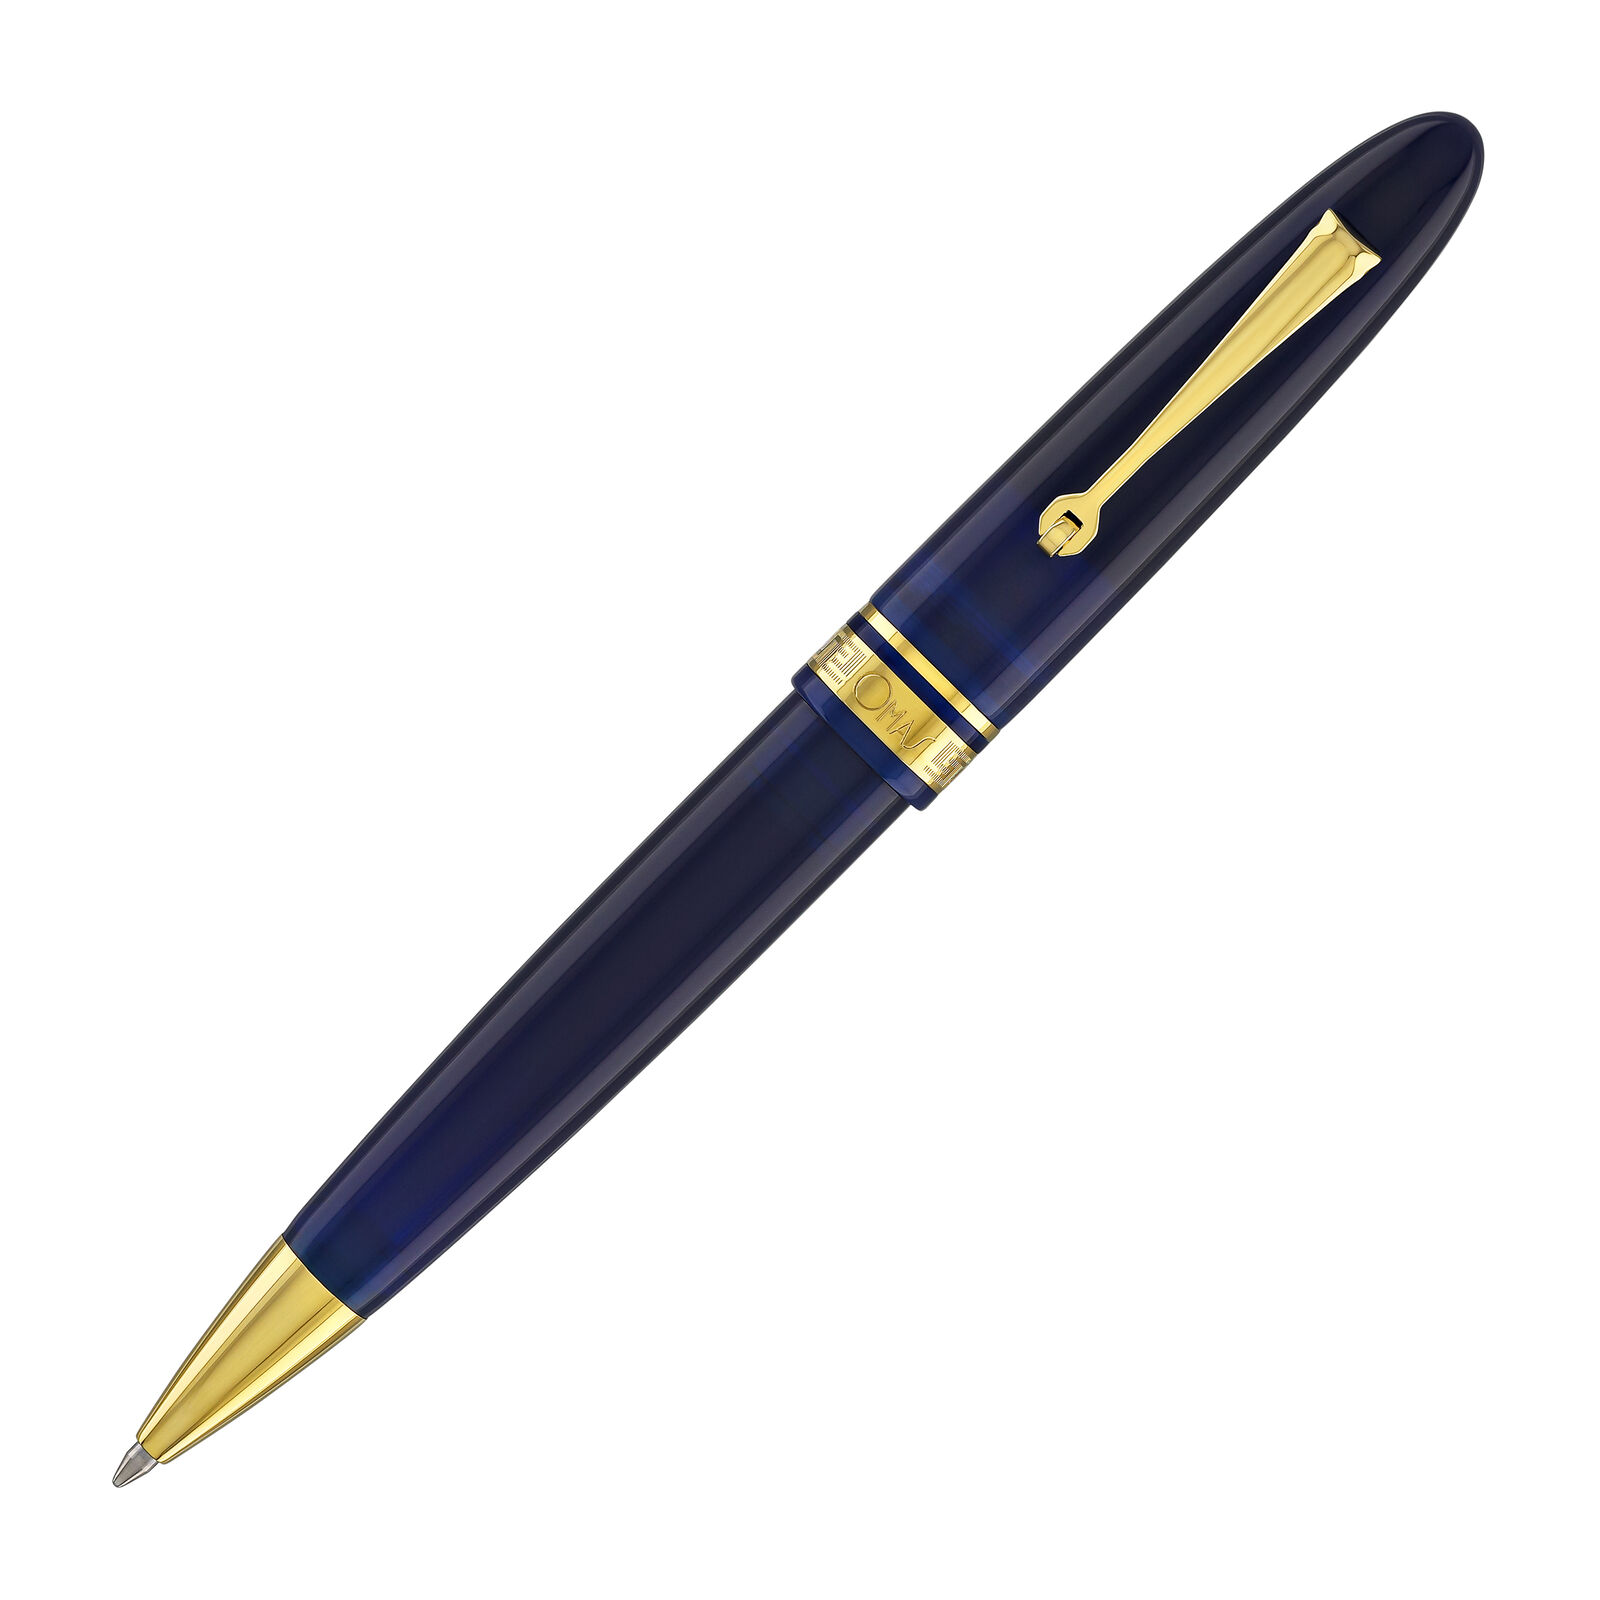 Omas Ogiva Ballpoint Pen in Blu with Gold Trim - NEW in Box